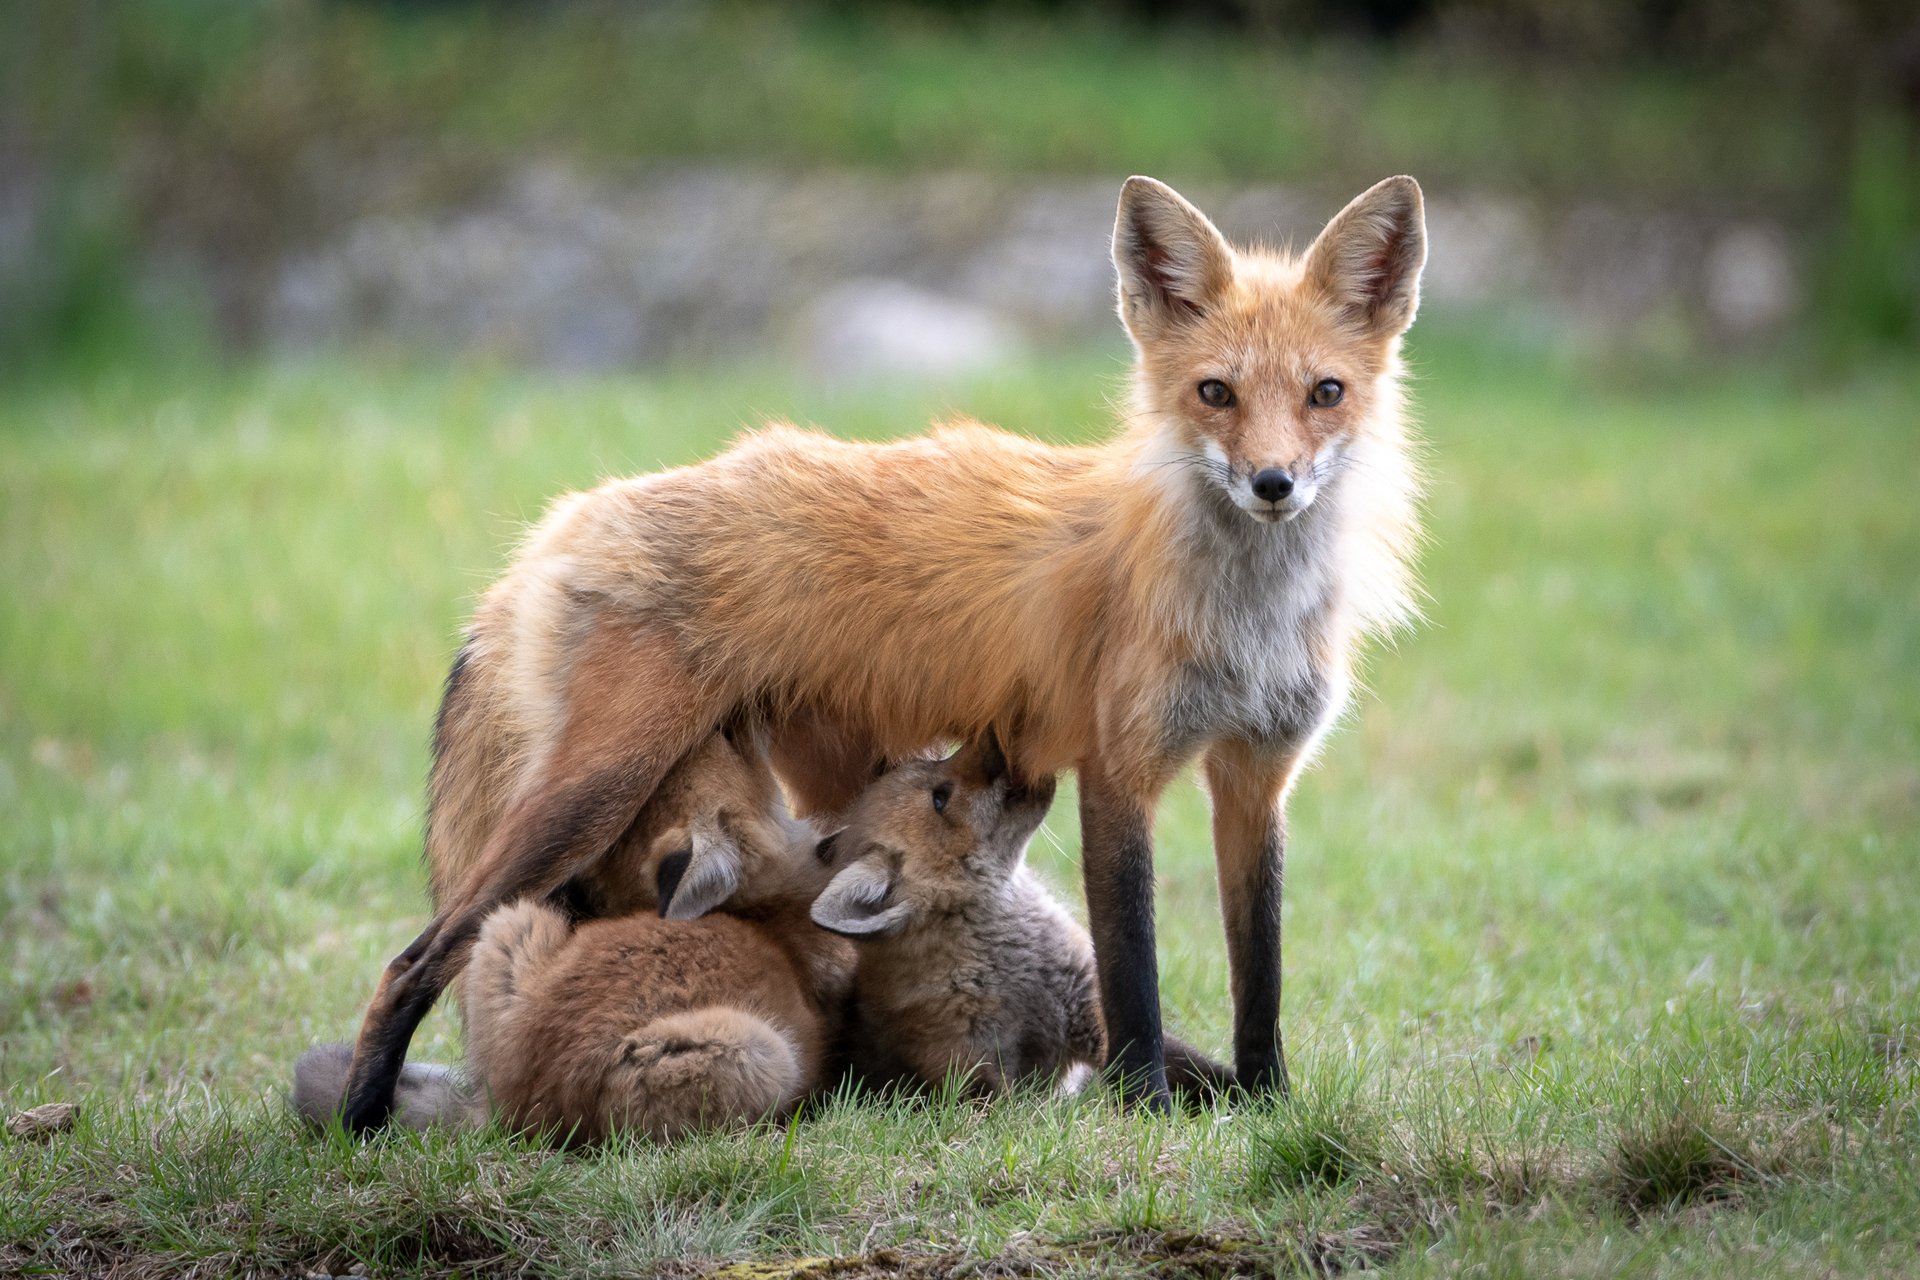 A mother fox standing with three kits feeding below her.